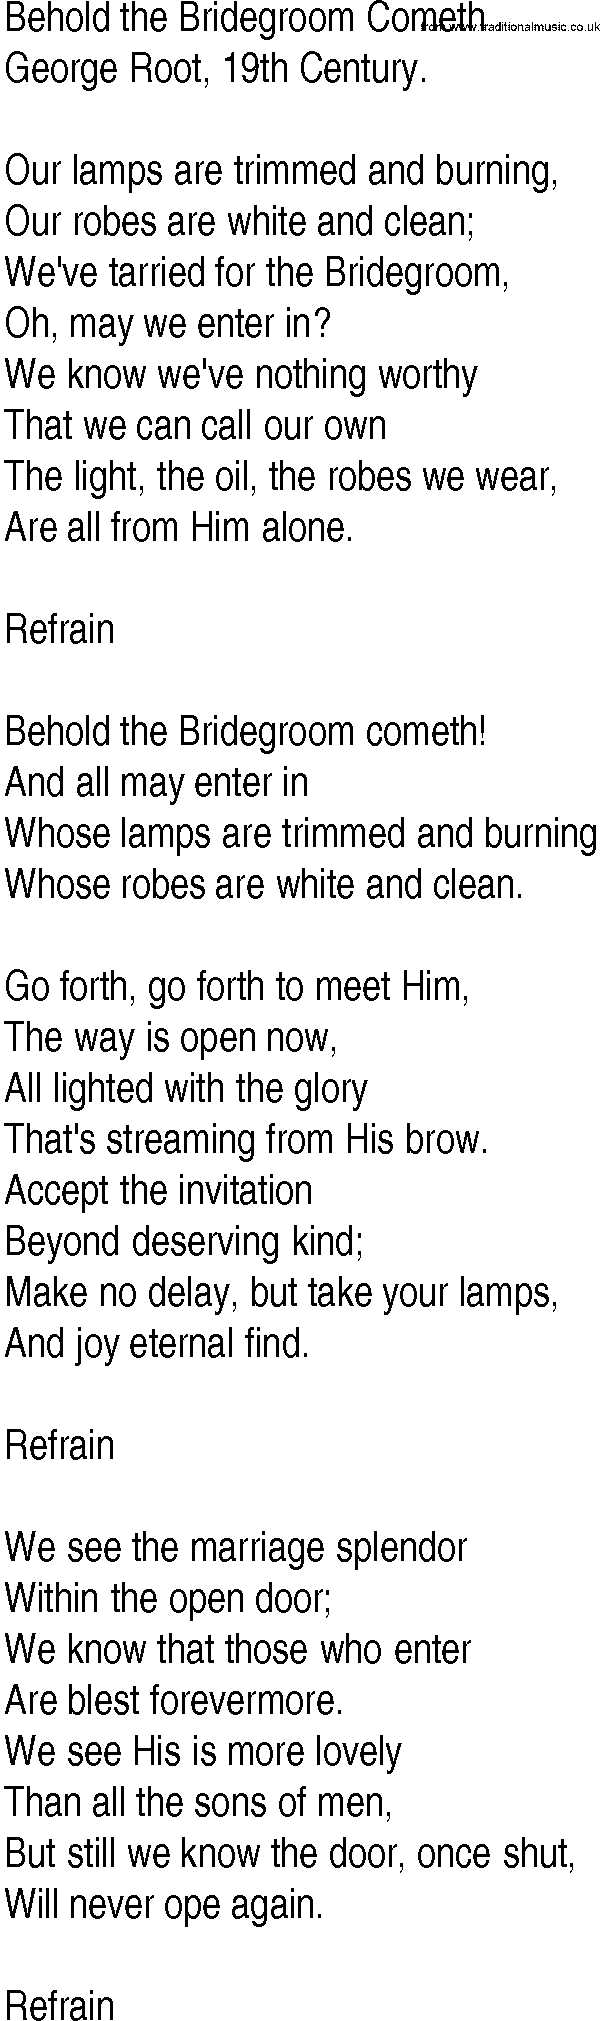 Hymn and Gospel Song: Behold the Bridegroom Cometh by George Root th Century lyrics